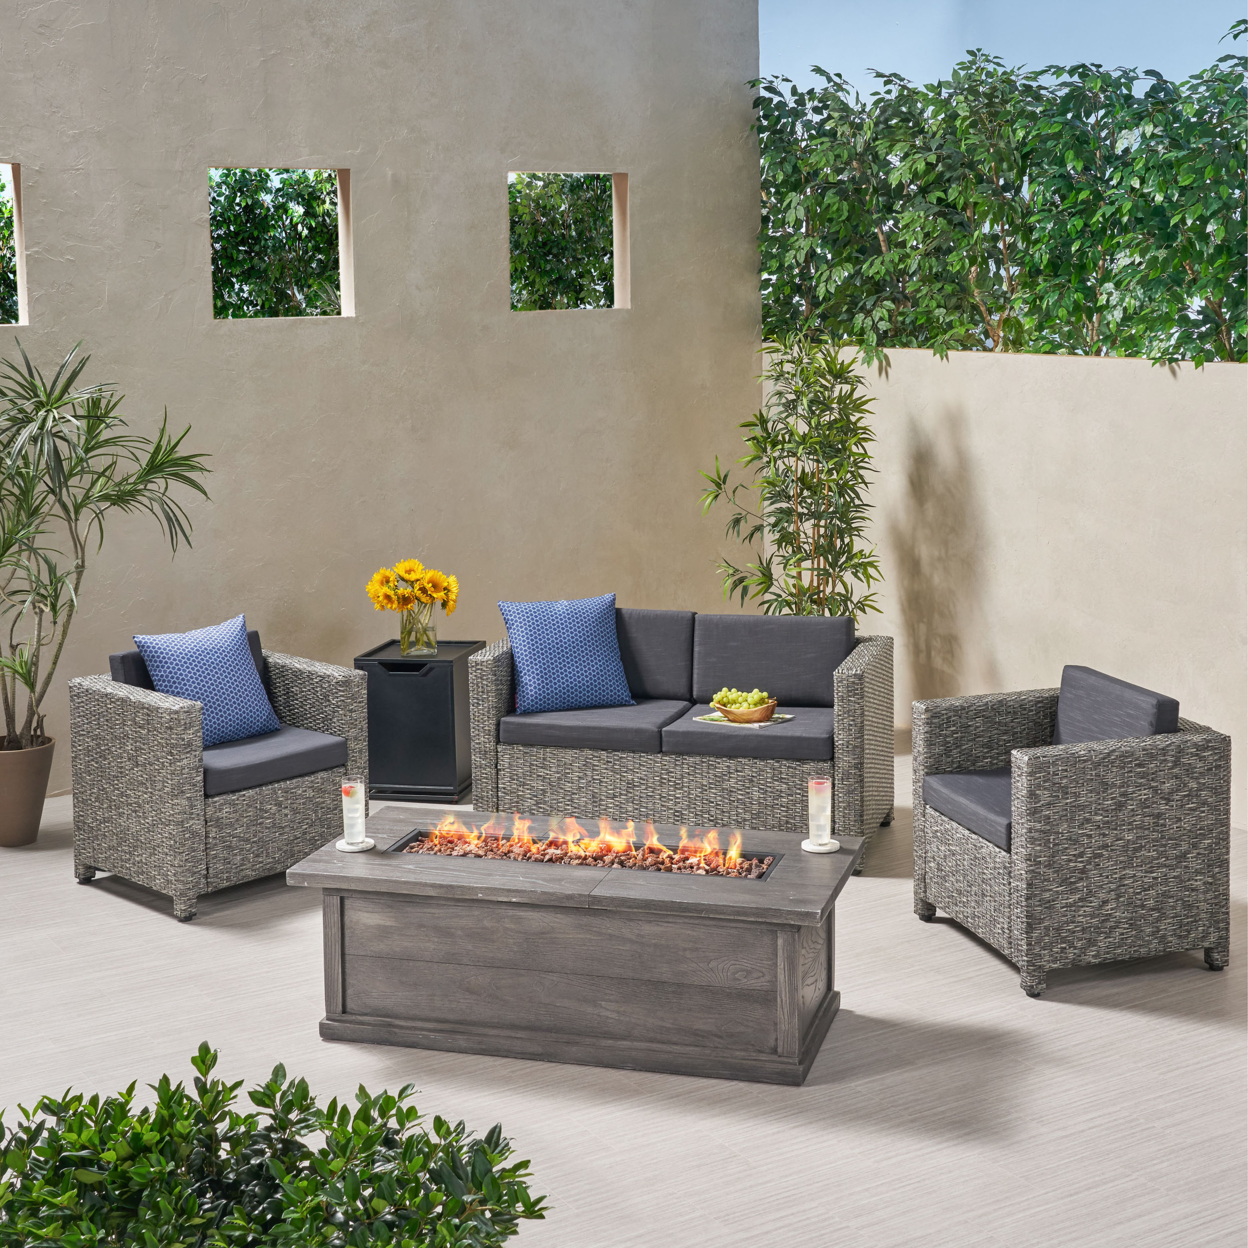 Candance Outdoor 4 Seater Wicker Chat Set With Fire Pit - Mix Black + Dark Gray + Gray